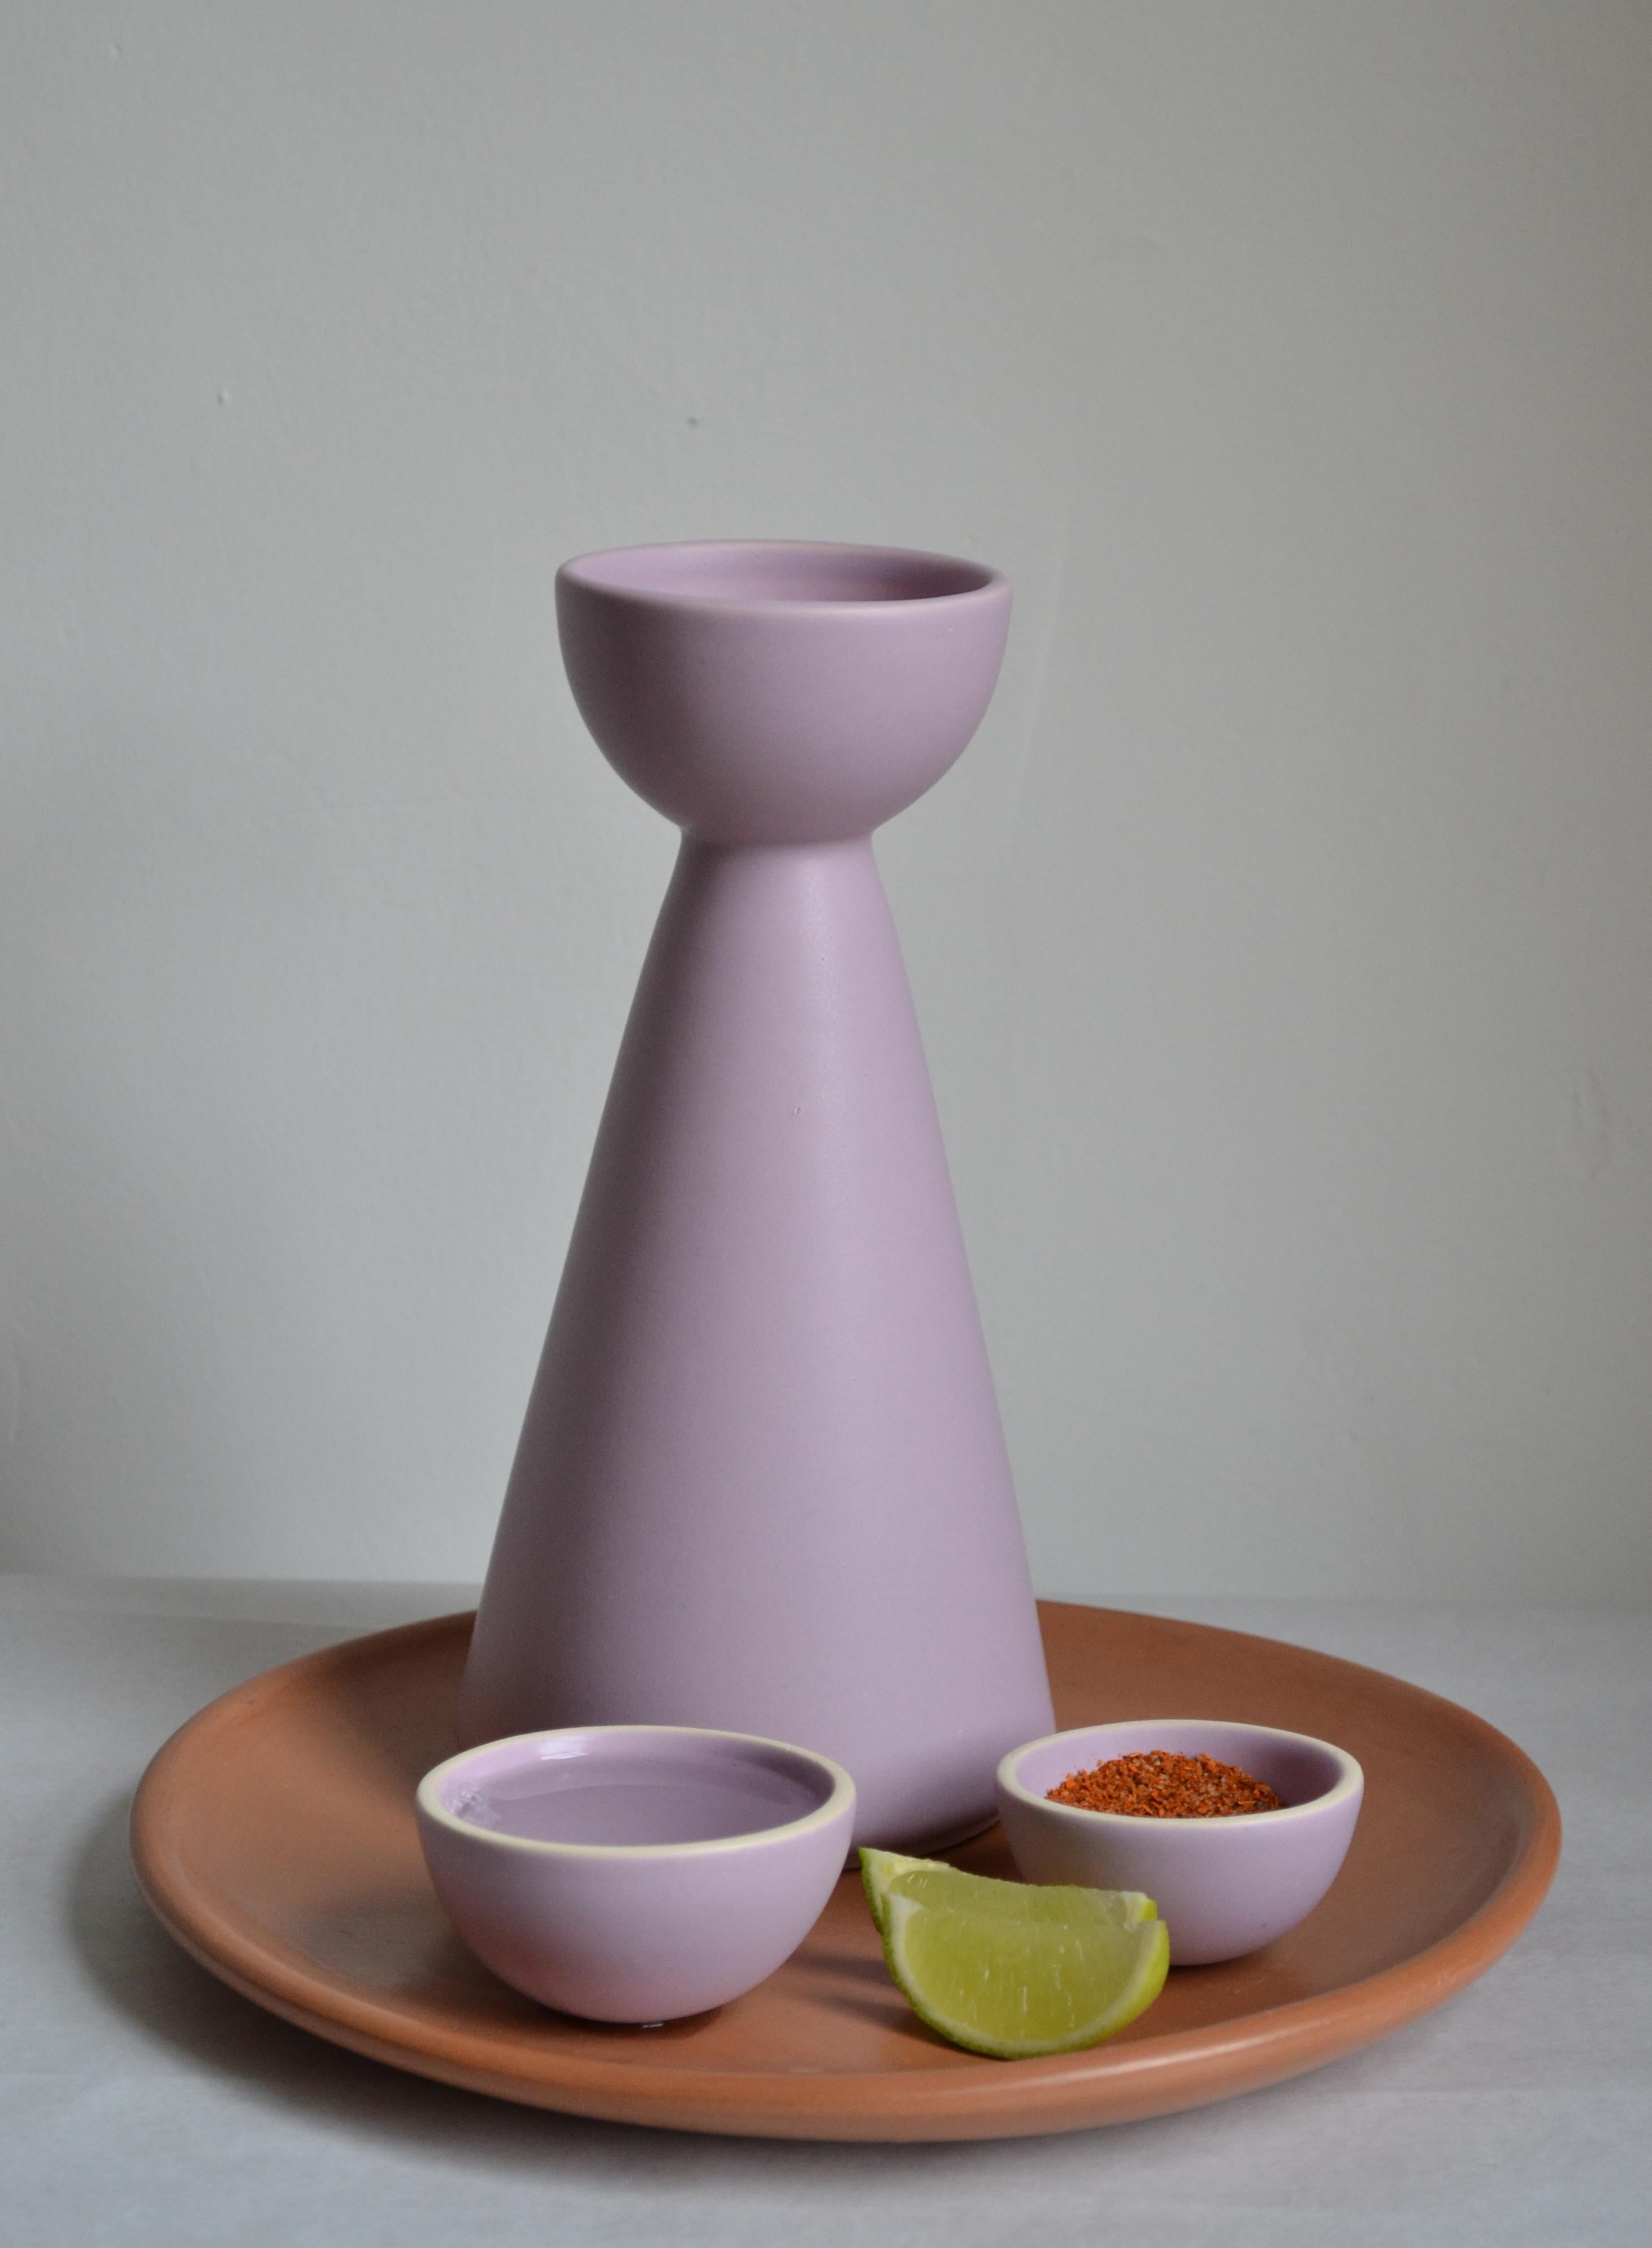 Set includes - 1 bottle and 2 cups

Our carafe colection is a tribute to the traditional pitchers of the regions of Tonala´ and Tlaquepaque in Jalisco, these two regions developed during the period of the conquest as pottery centers.

Half